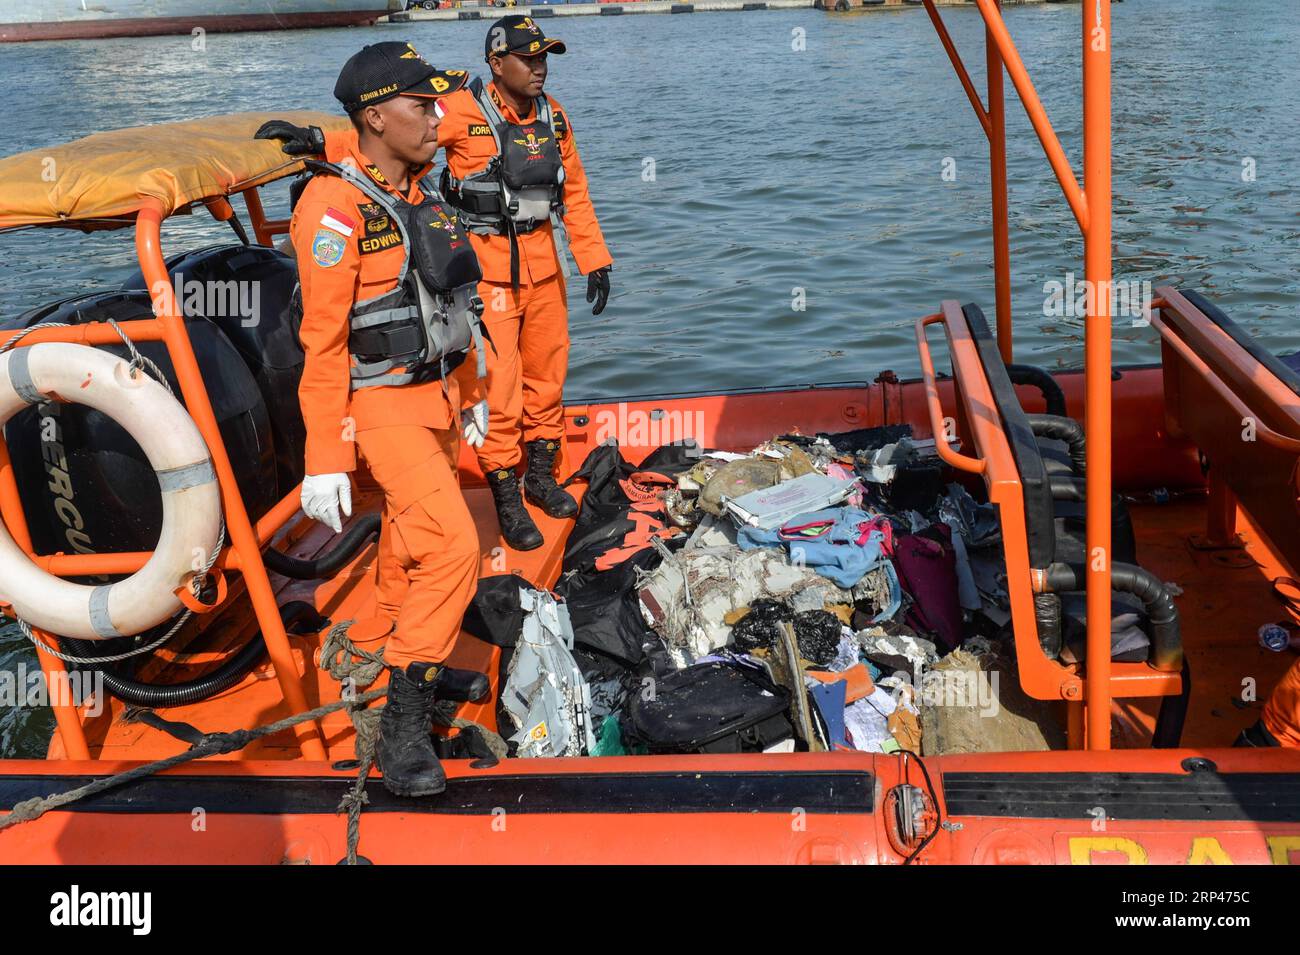 News Bilder des Tages Indonesien, Flugzeugabsturz bei Jakarta, Teile des Wracks gefunden (181029) -- JAKARTA, Oct. 29, 2018 -- Search and Rescue officers stand on the speed boat carrying debris of passenger jet and body of victims at the Tanjung Priok port, Jakarta, Indonesia, Oct. 29, 2018. A passenger plane of Indonesia s Lion Air with 189 people aboard crashed into the sea off Karawang of Indonesia s West Java province shortly after taking off from Jakarta Monday, head of the national Search and Rescue Office M. Syaugi said. ) (psw) INDONESIA-JAKARTA-LION AIR-CRASH VerixSanovri PUBLICATIONx Stock Photo